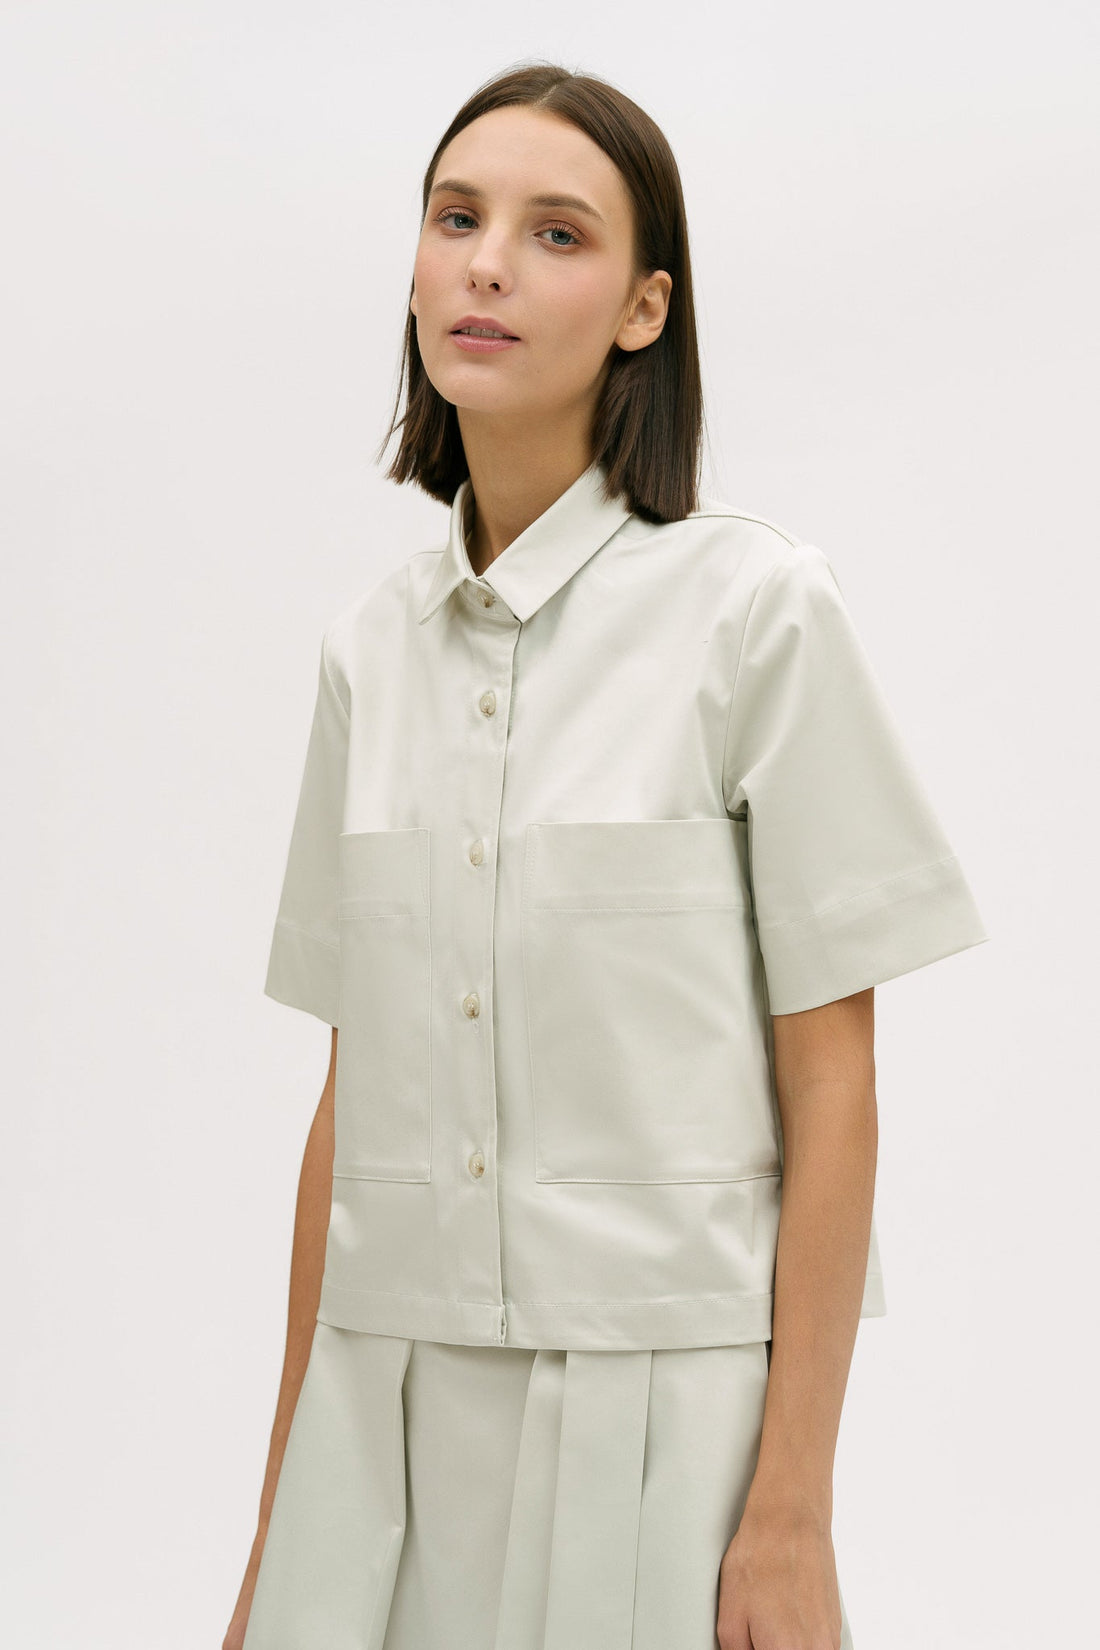 A woman with shoulder length brown hair is wearing an off-white utility shirt